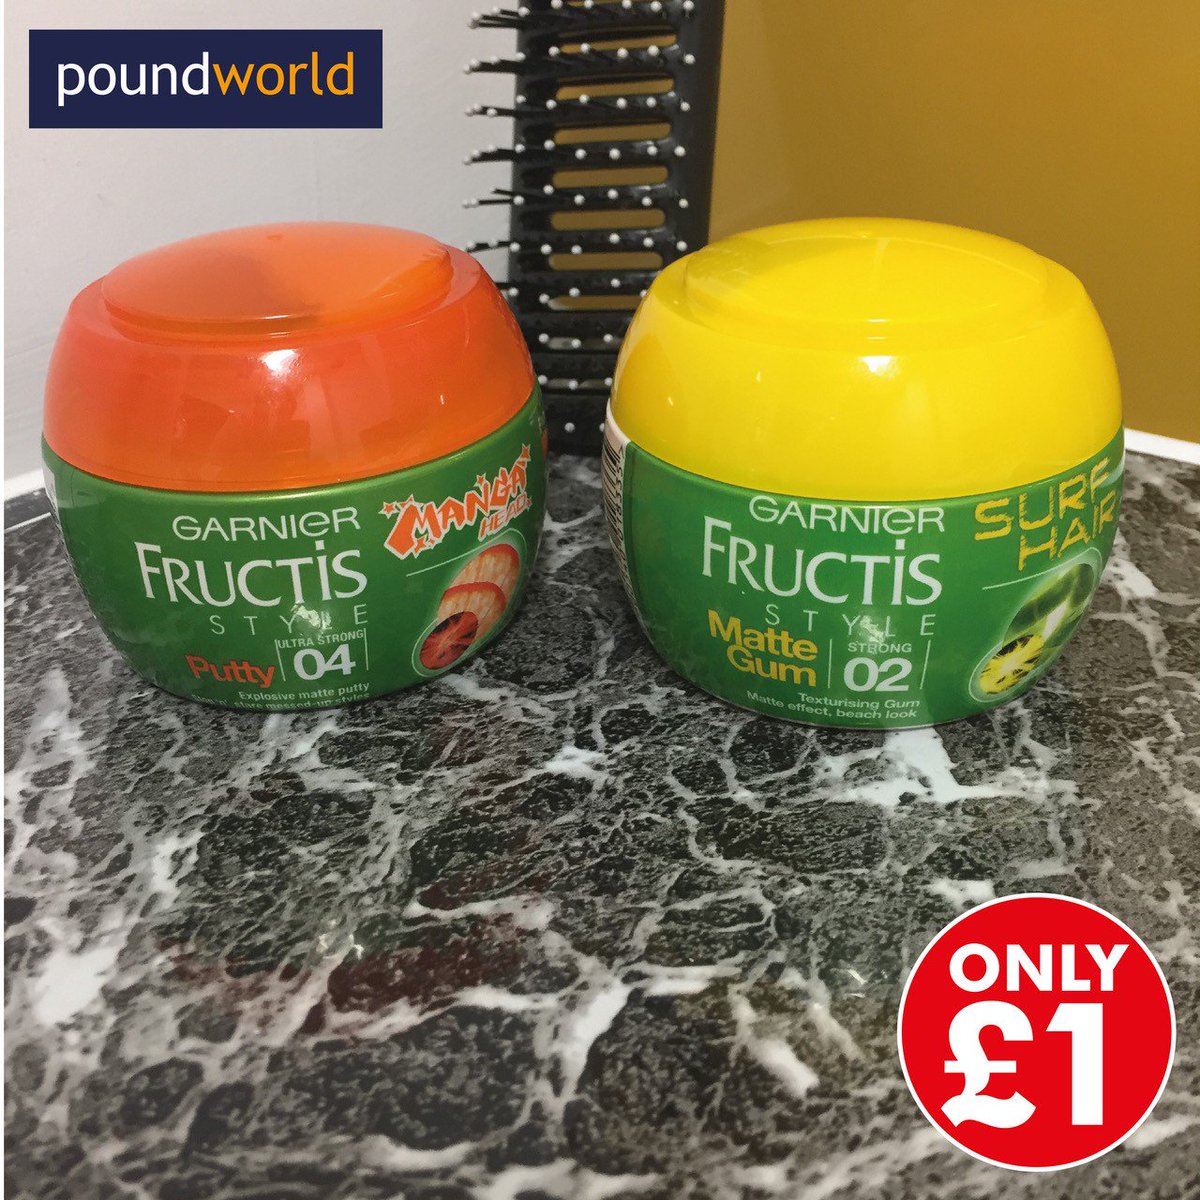 tuin Optimaal dennenboom Poundworld on Twitter: "Here's a deal - #Fructis Style Putty (Manga Head)  and Matte Gum (Surf Hair) for ONLY £1 - this is currently THREE TIMES the  price elsewhere. https://t.co/HMAbDZZt2i" / Twitter